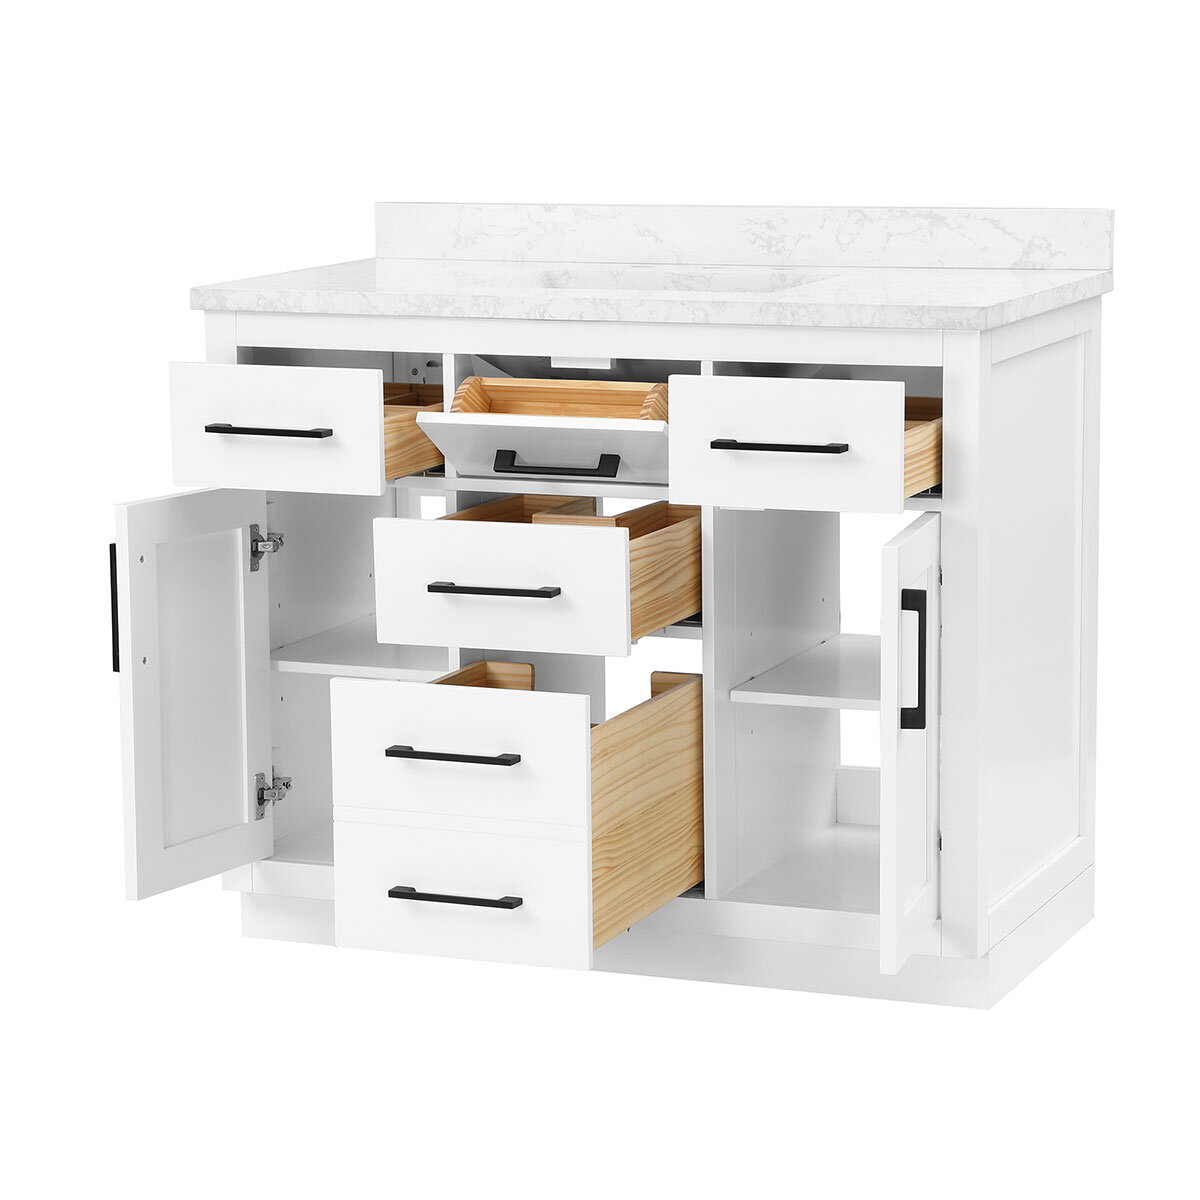 Alonso 42" Vanity cut out image showing drawers open